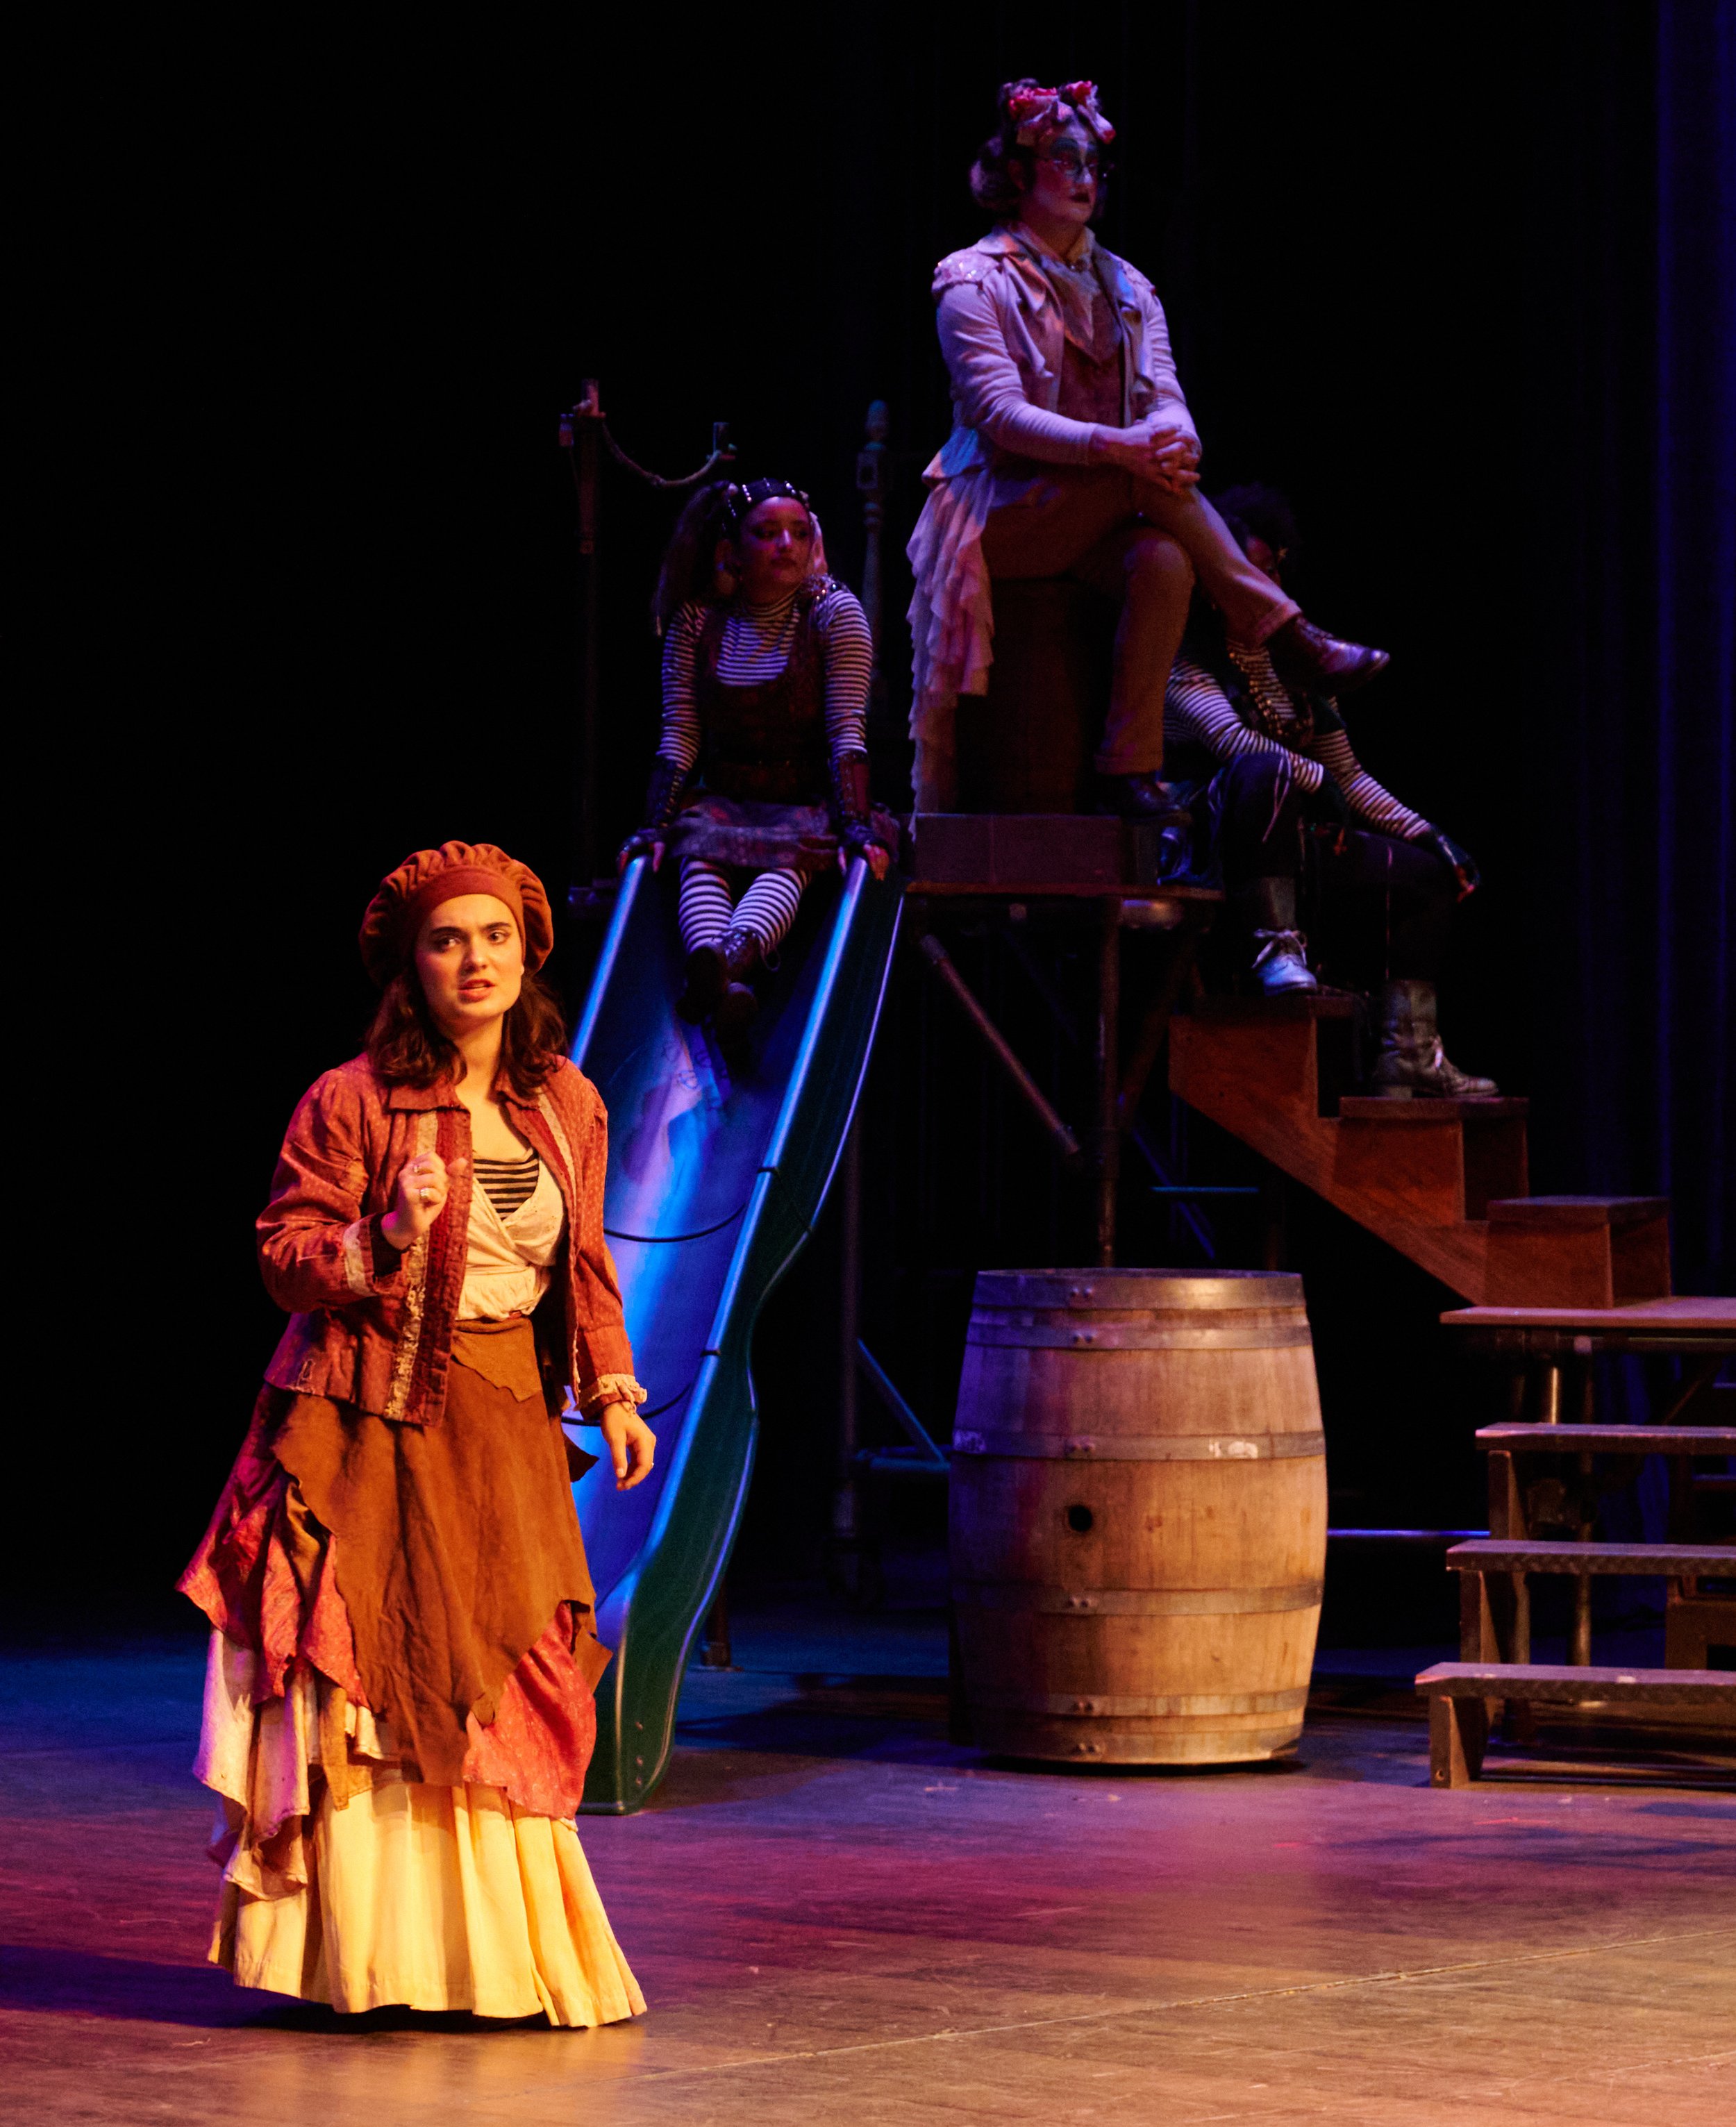  Justine Marin, Katrina Waight, Jordi Kligman, and Charity Reid during a performance of the Santa Monica College Theatre Arts production of "Treasure Island" at the SMC Main Stage on Sunday, May 22, 2022, in Santa Monica, Calif. (Nicholas McCall | Th